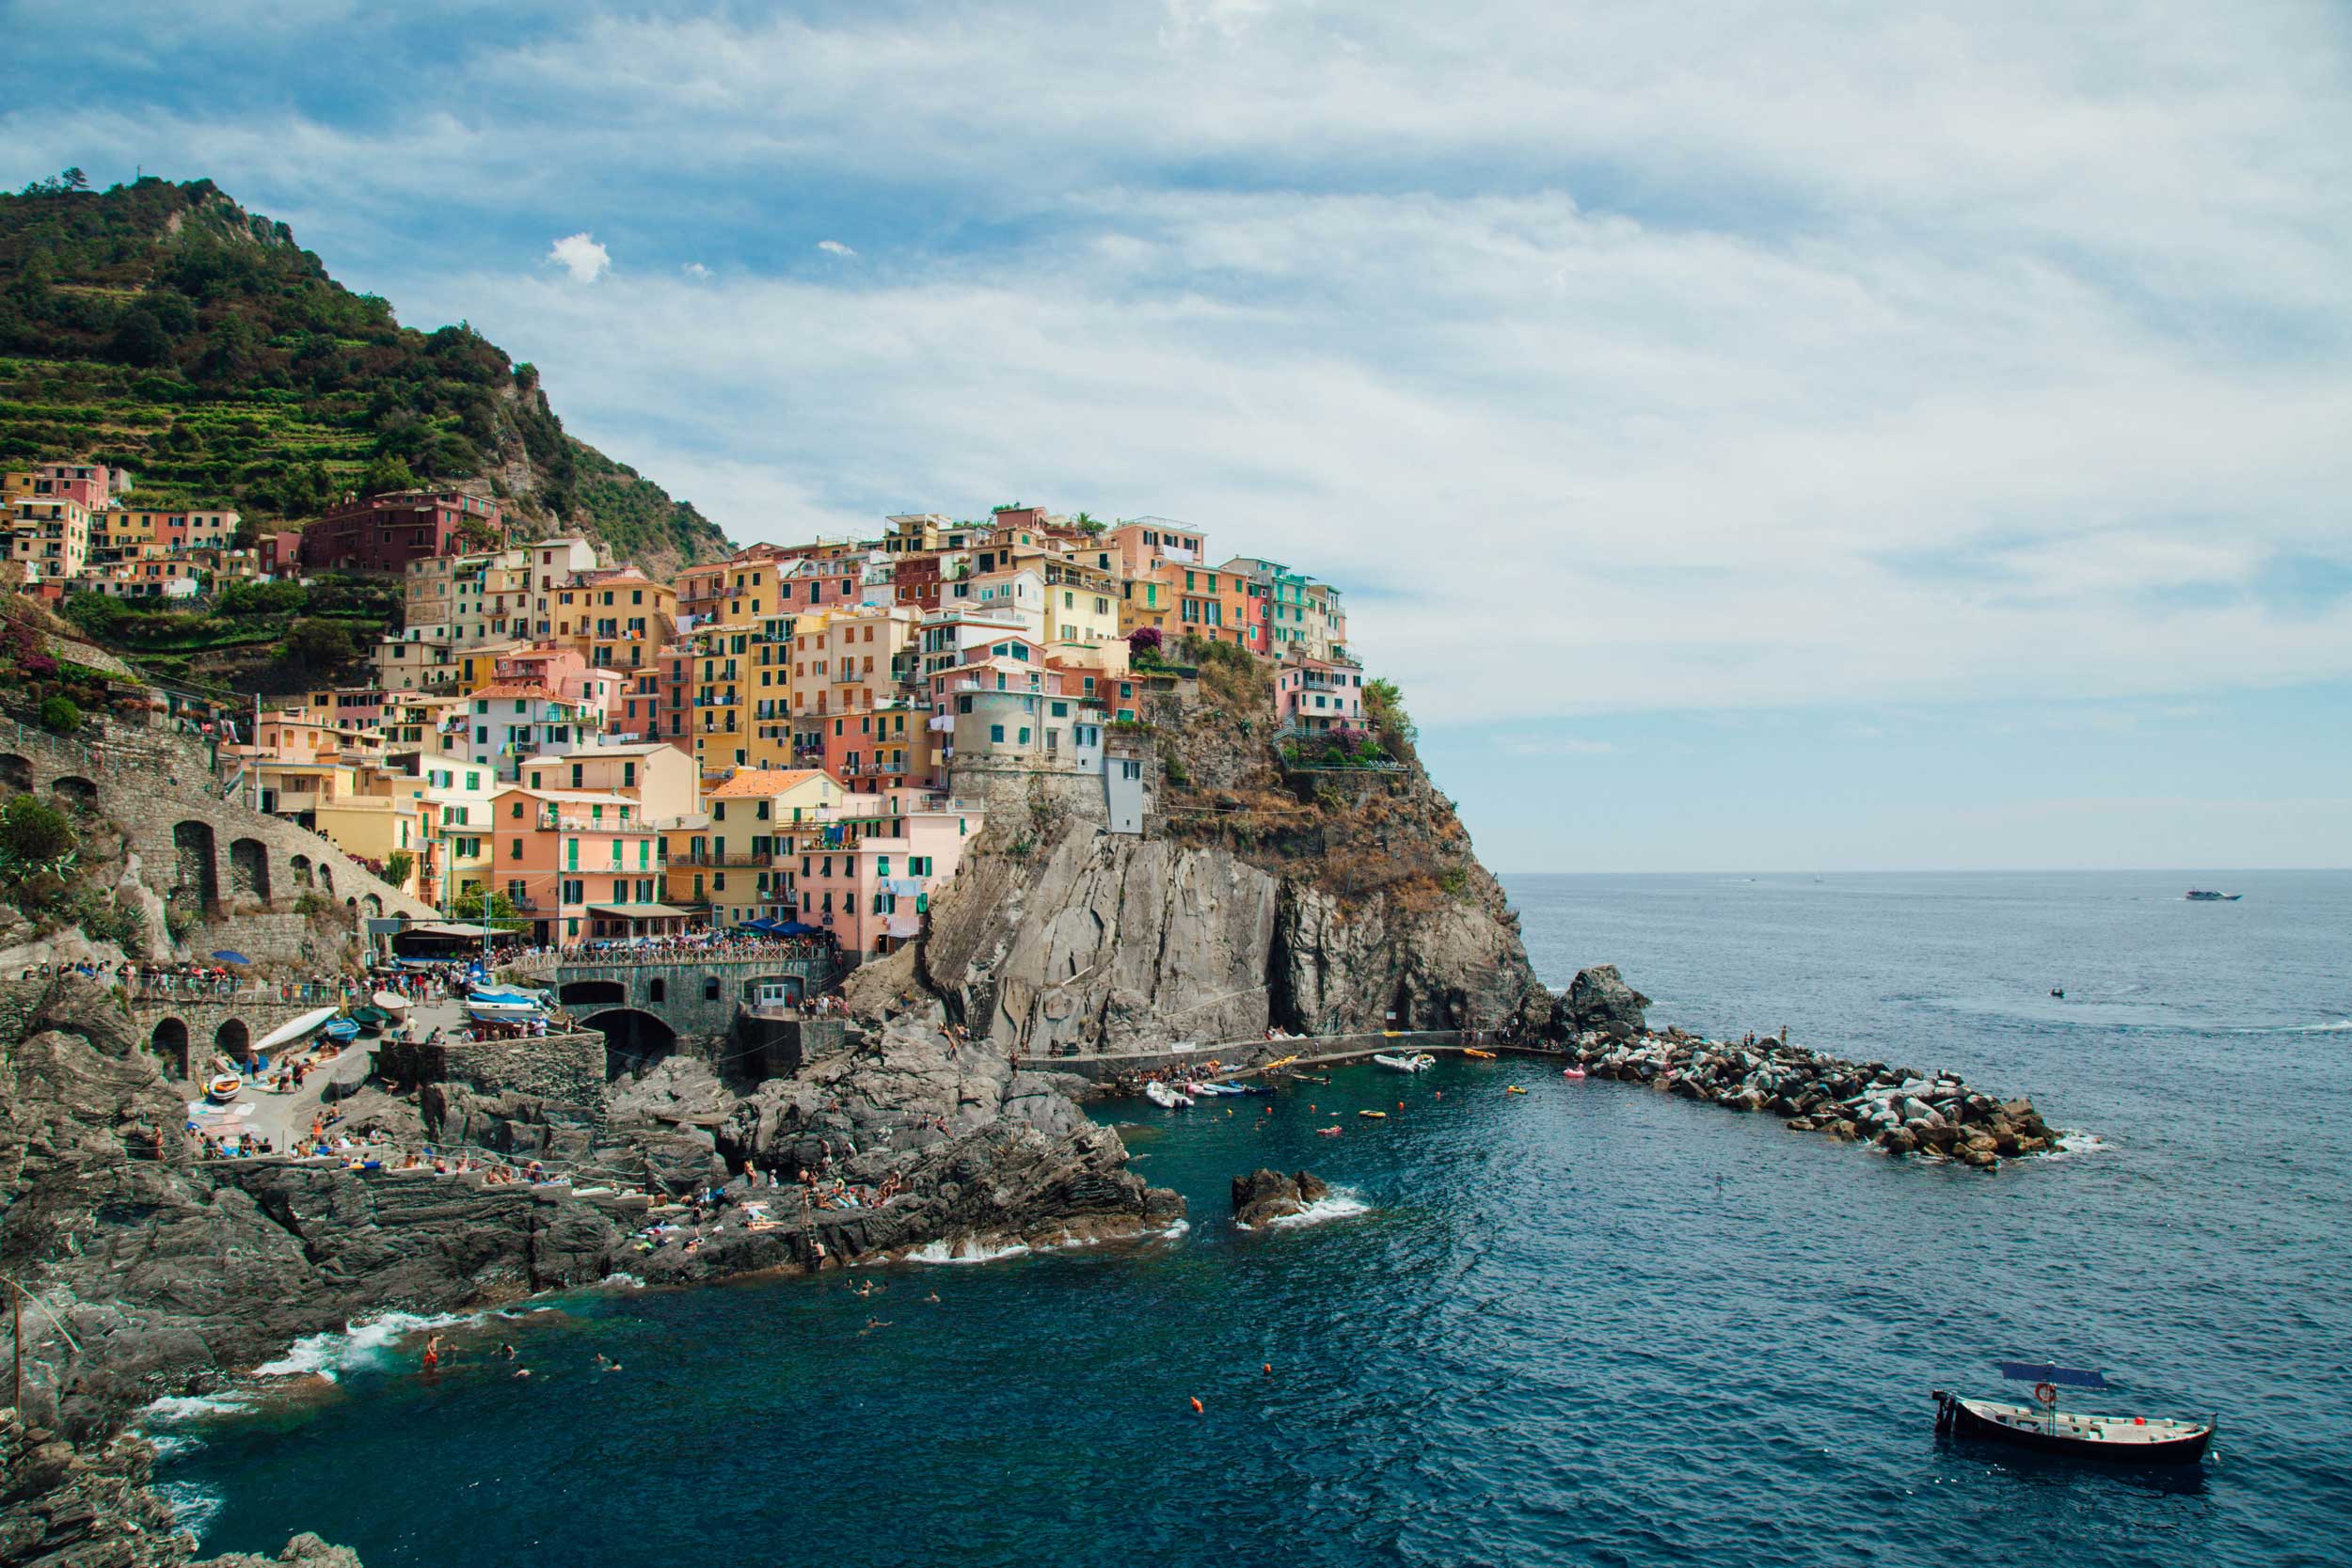 A town with multi-coloured buildings perched on a cliff with people swimming in the sea, Cinque Terre, Italy